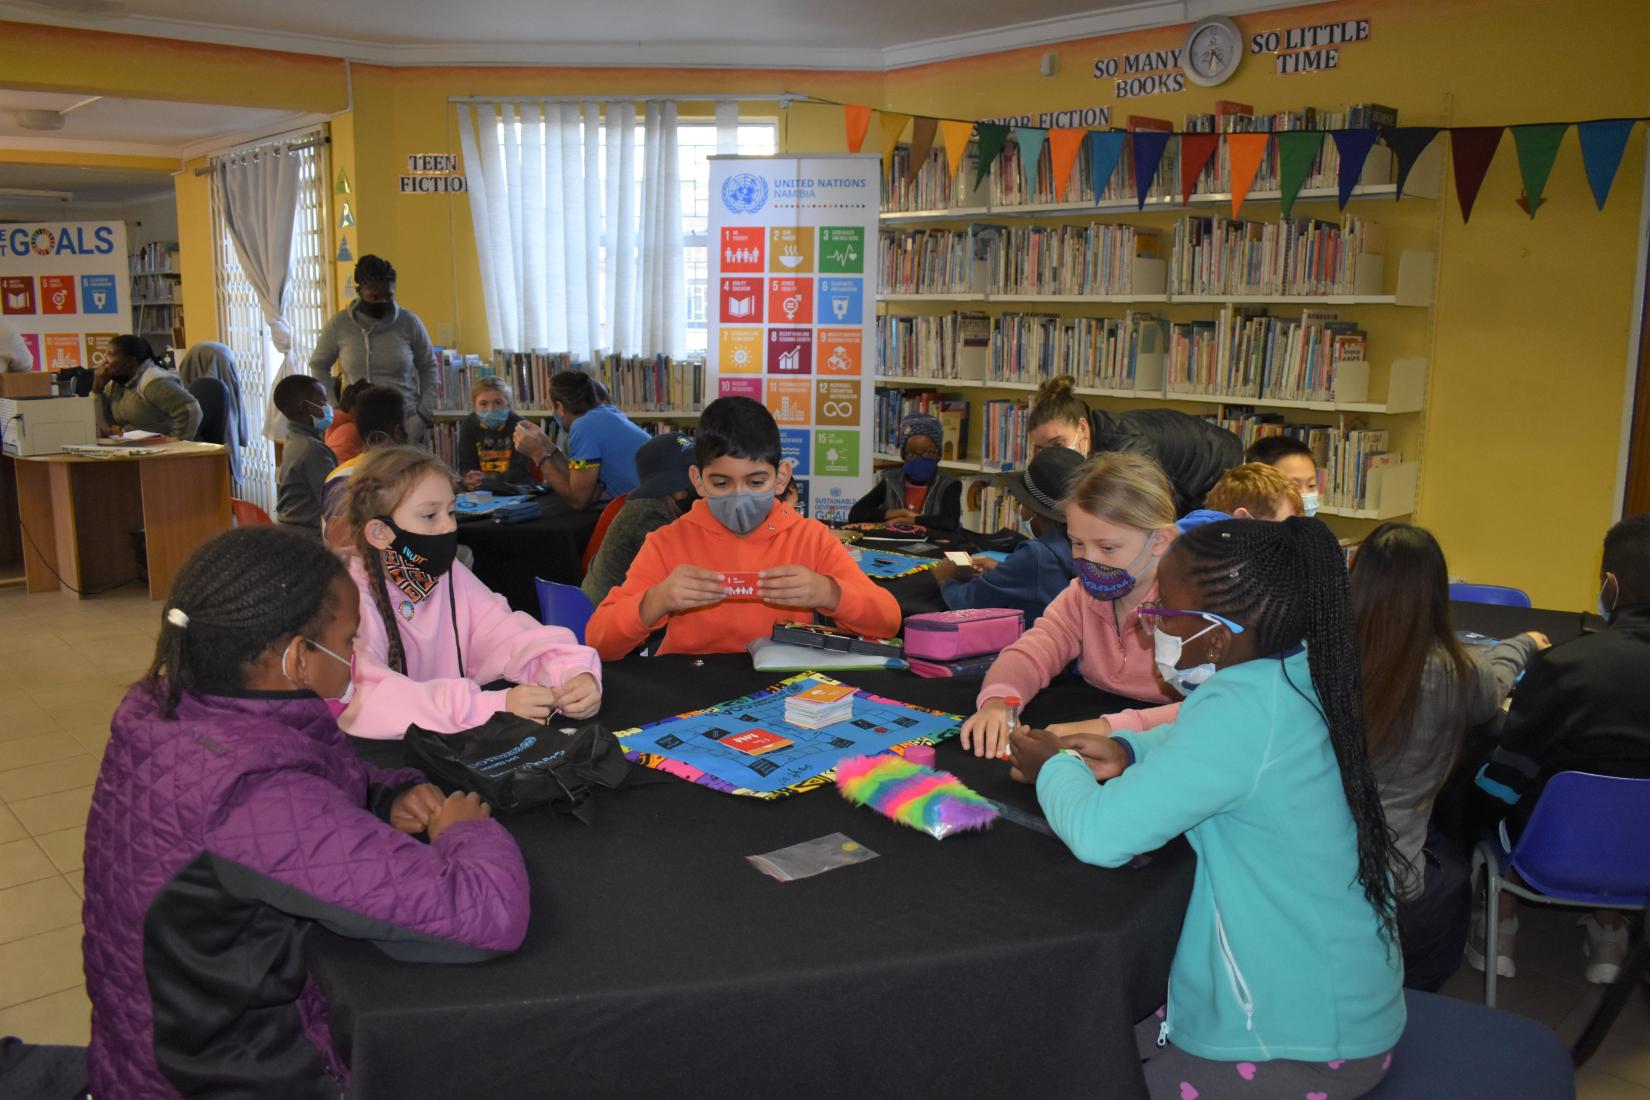 Groups of students playing Swift SDG Edition in the school library